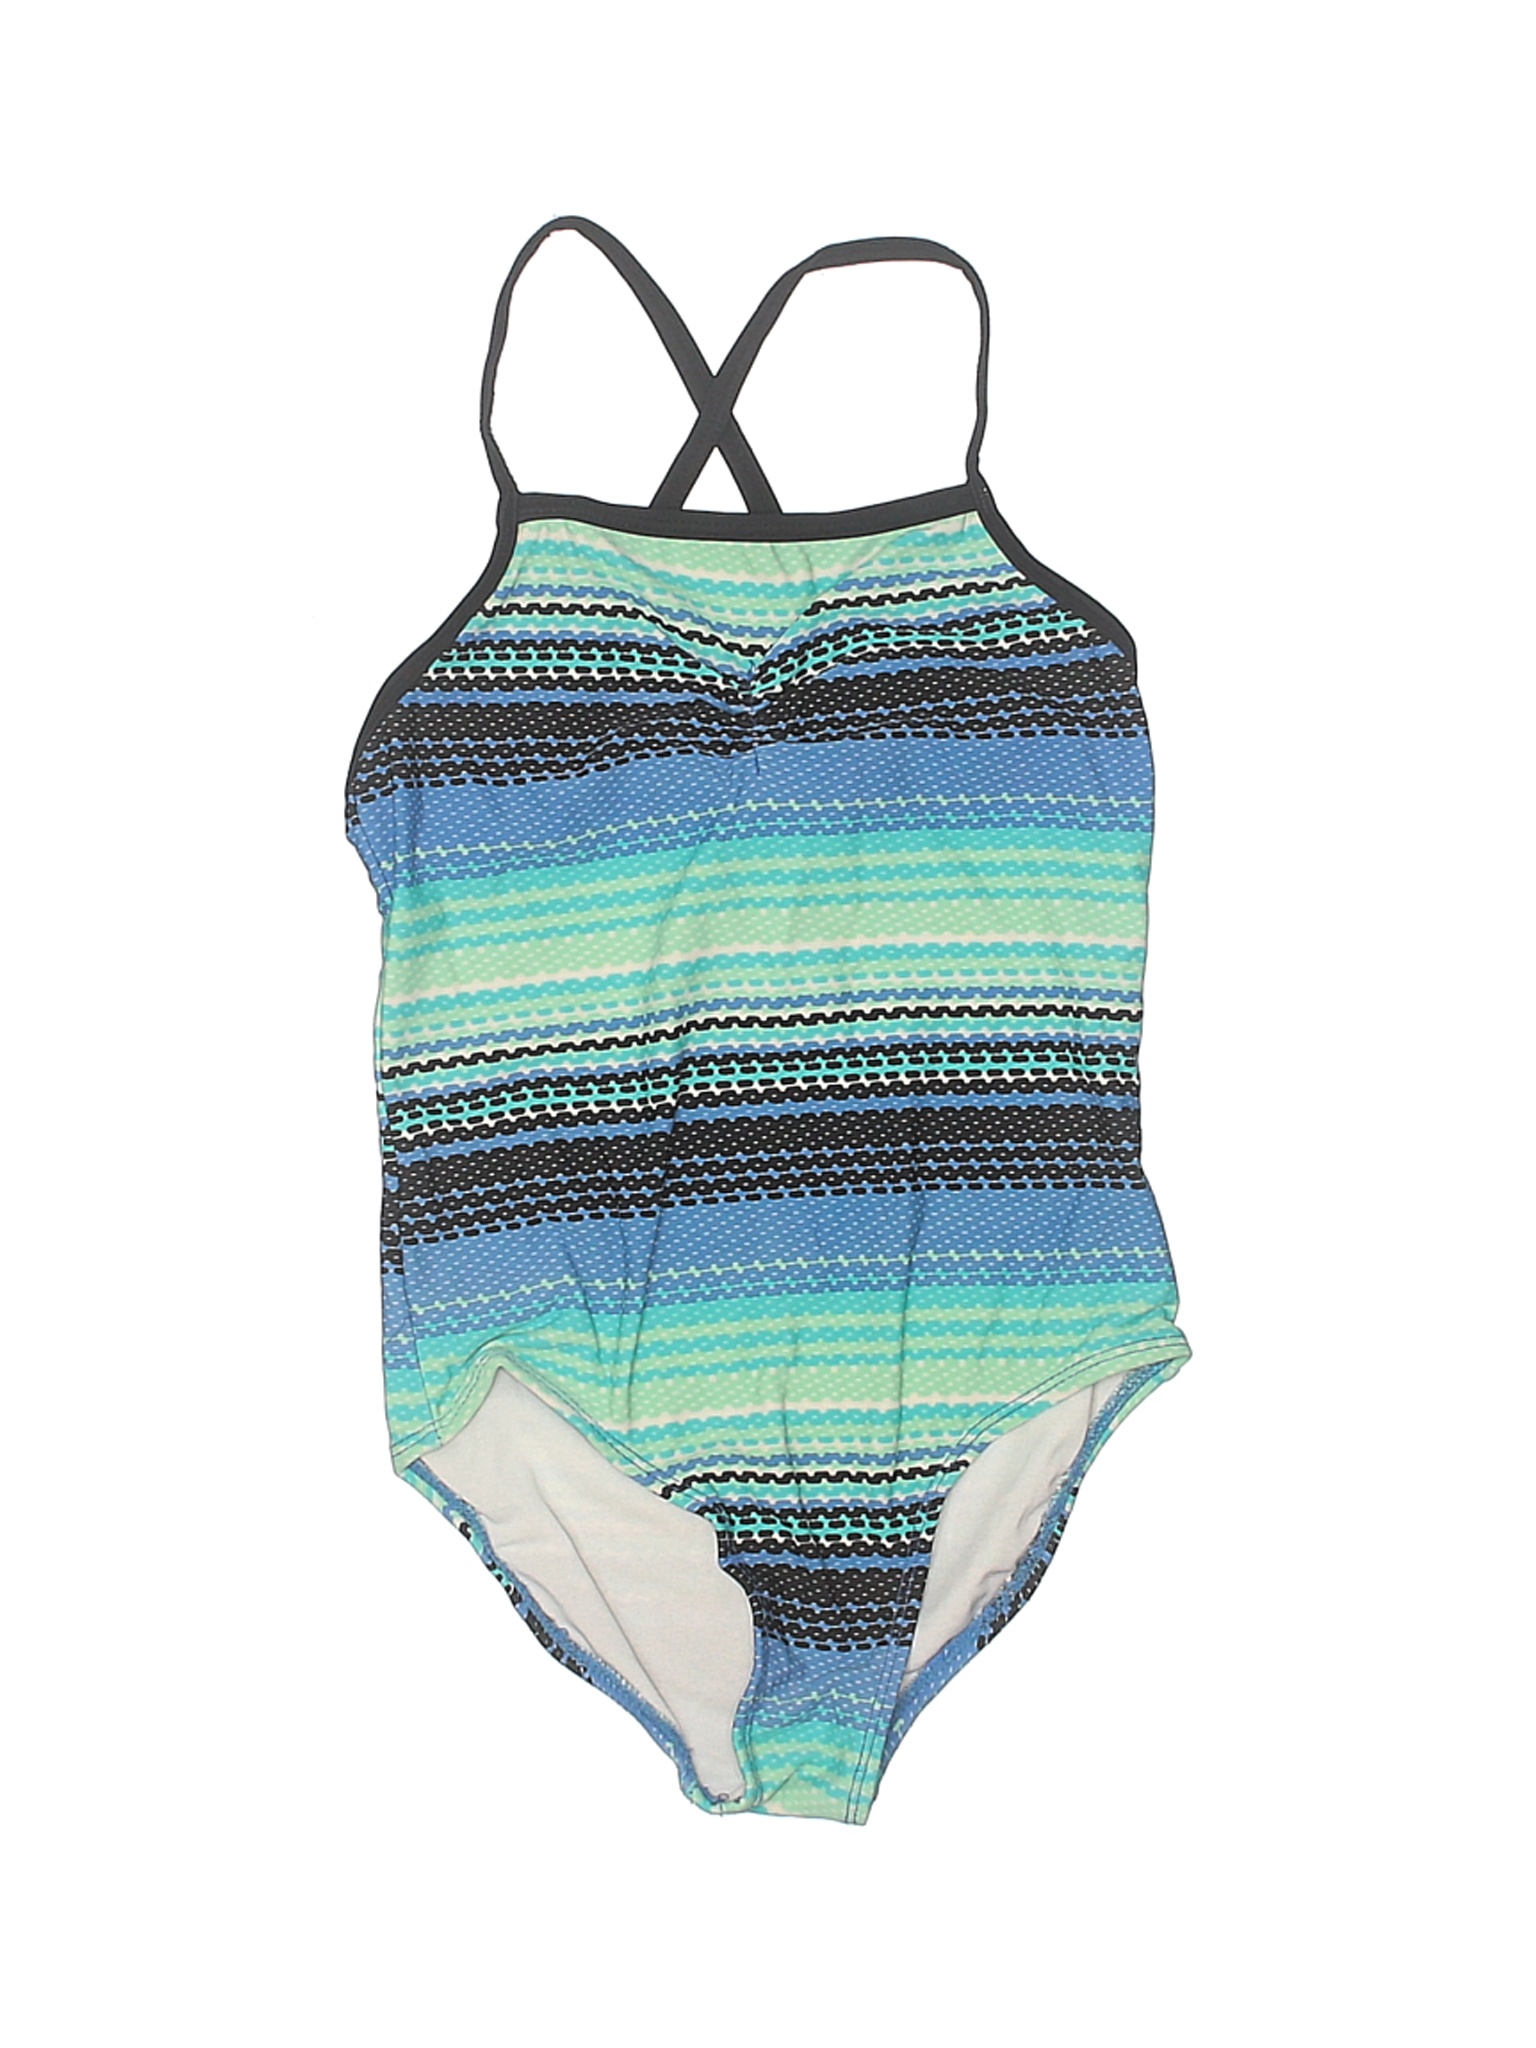 Old Navy Girls Blue One Piece Swimsuit S Youth | eBay